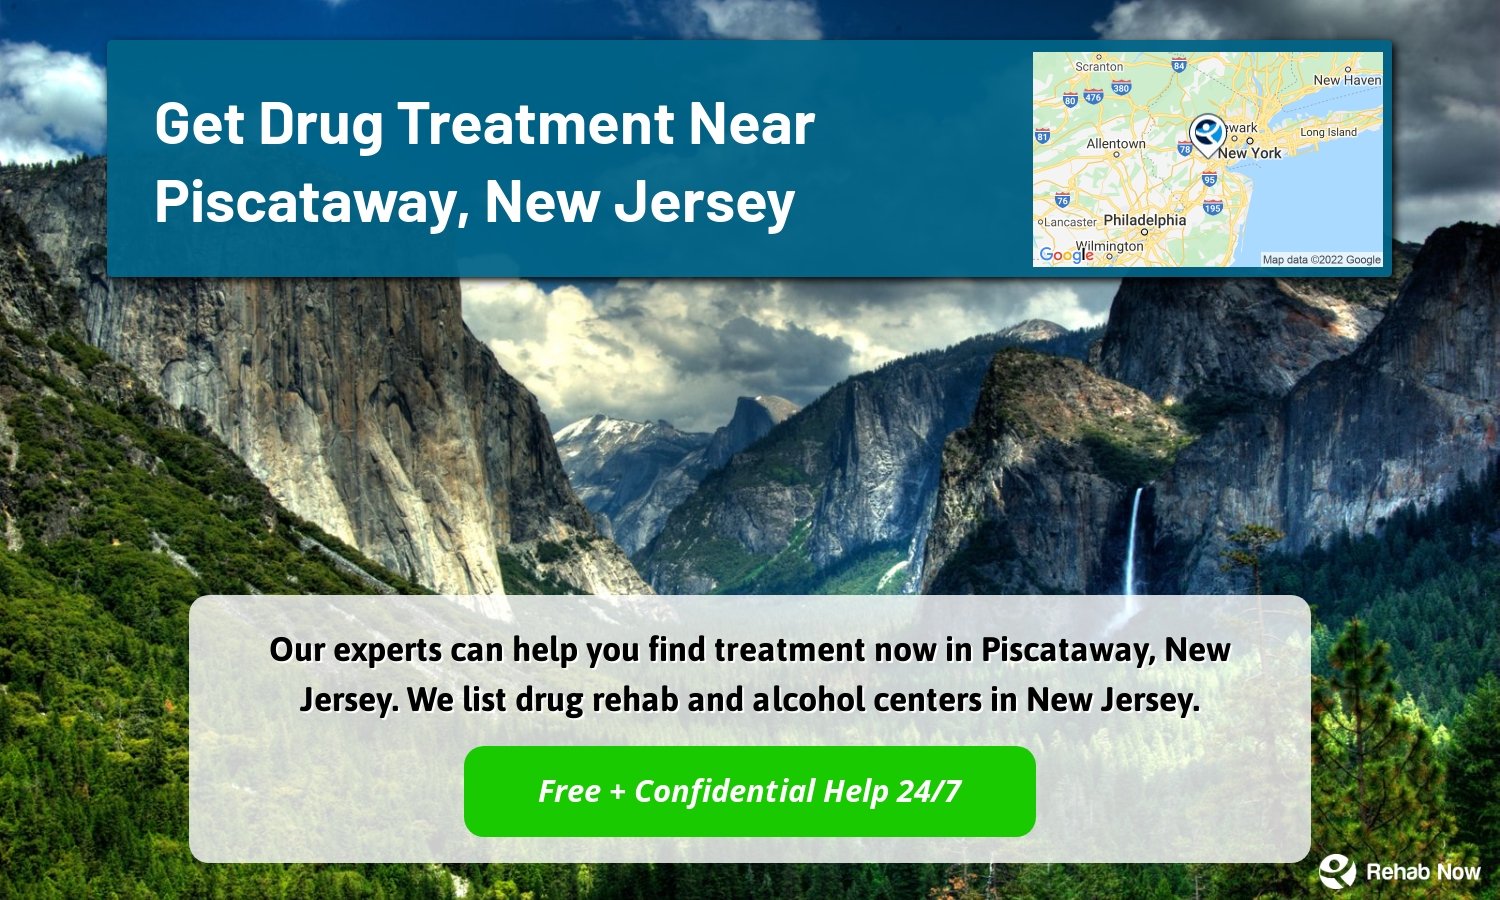 Our experts can help you find treatment now in Piscataway, New Jersey. We list drug rehab and alcohol centers in New Jersey.